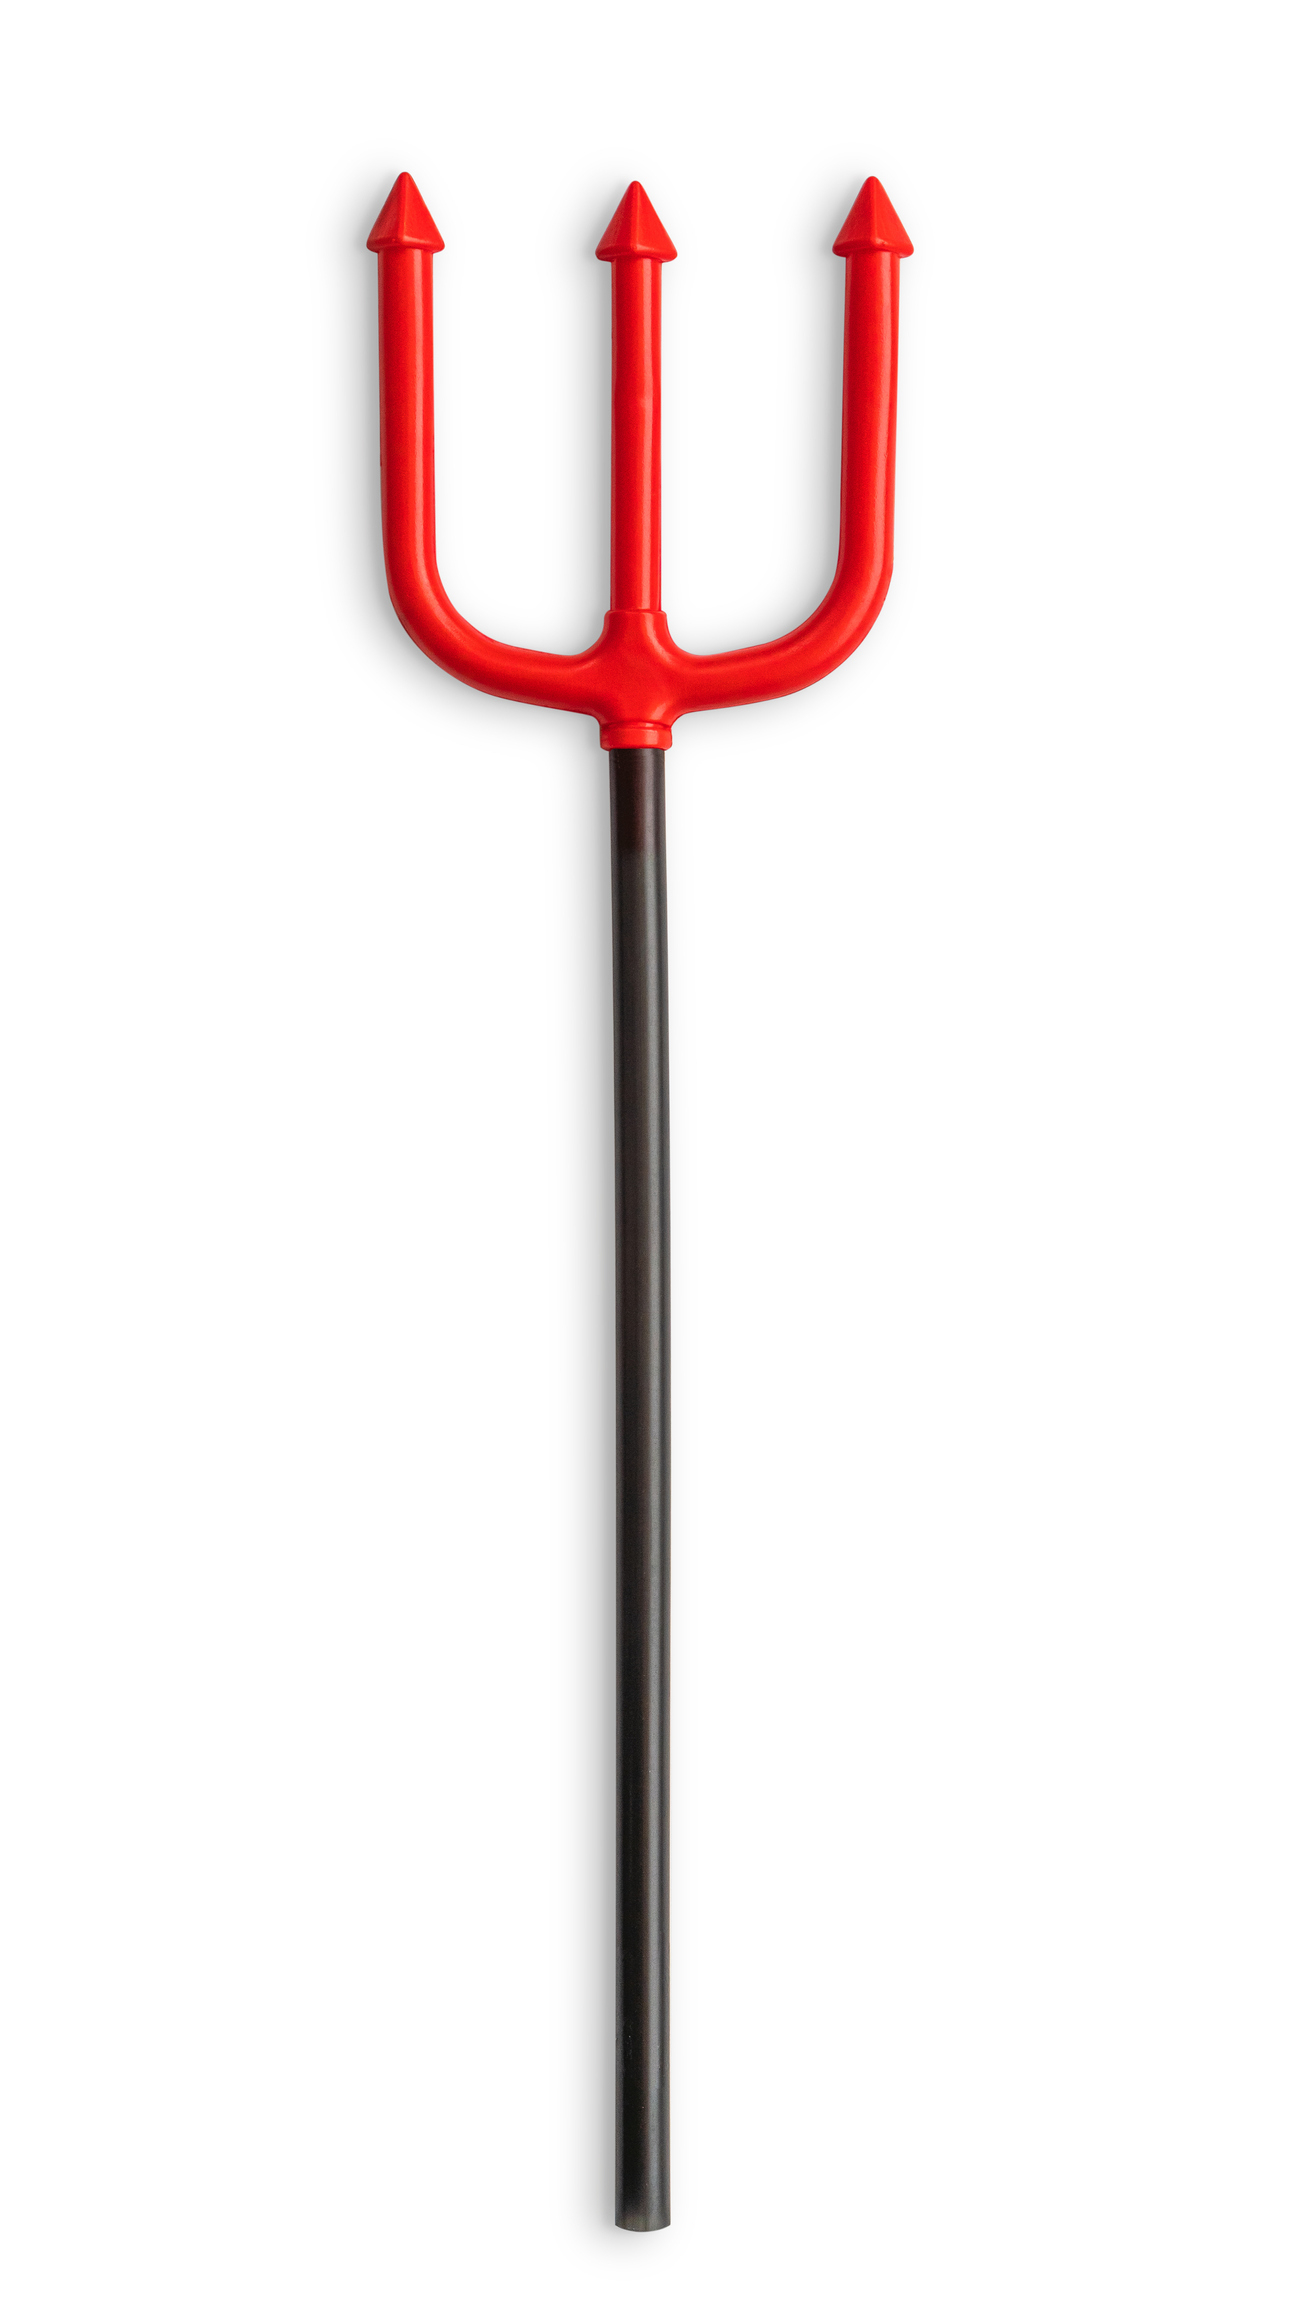 Plastic trident with red prongs and black handle, resembling a prop for a costume